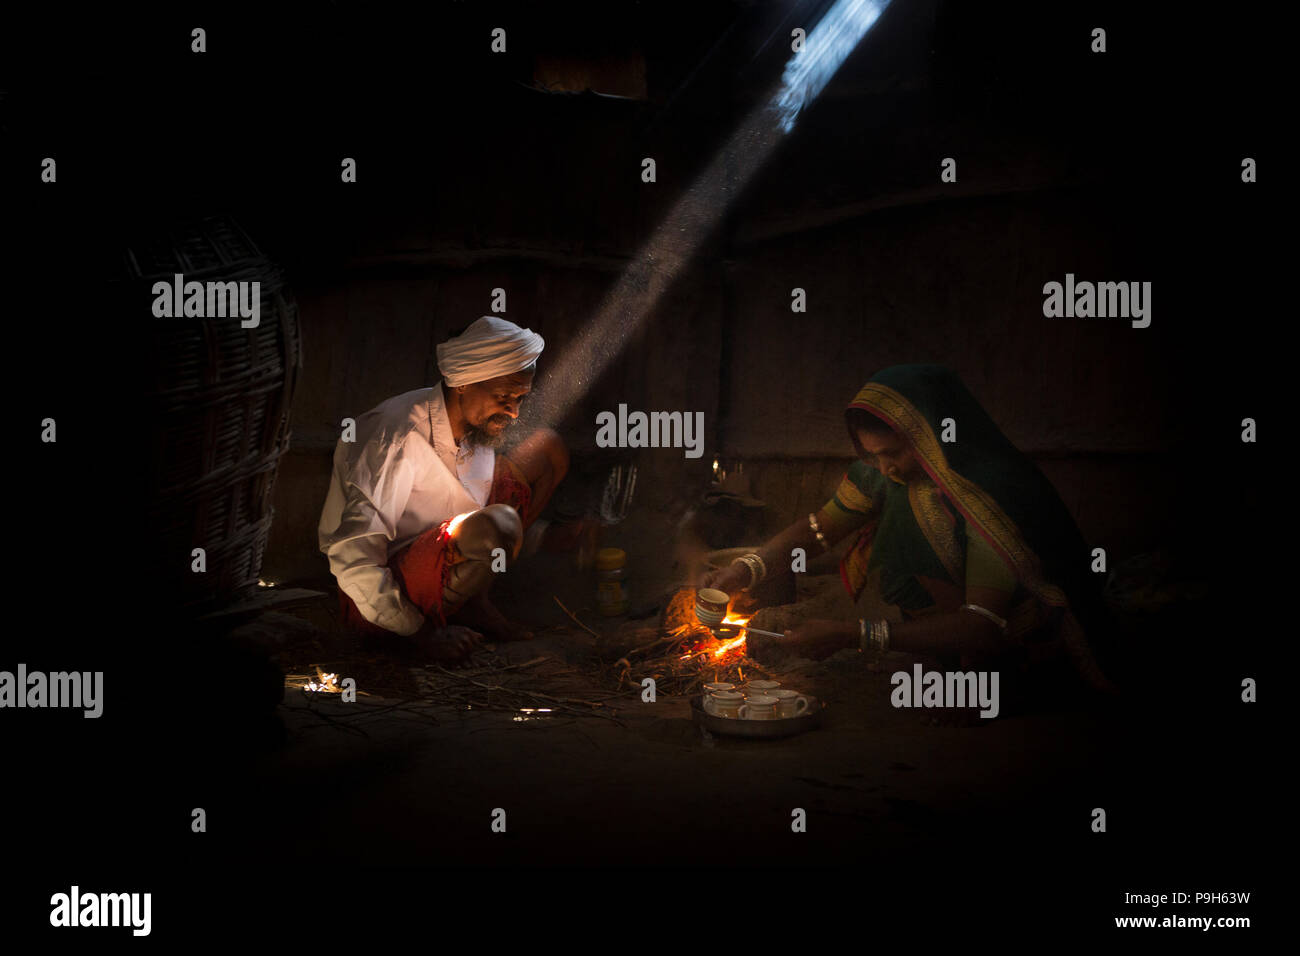 A husband and wife make Indian chai on a open fire in their home, Indore, India. Stock Photo